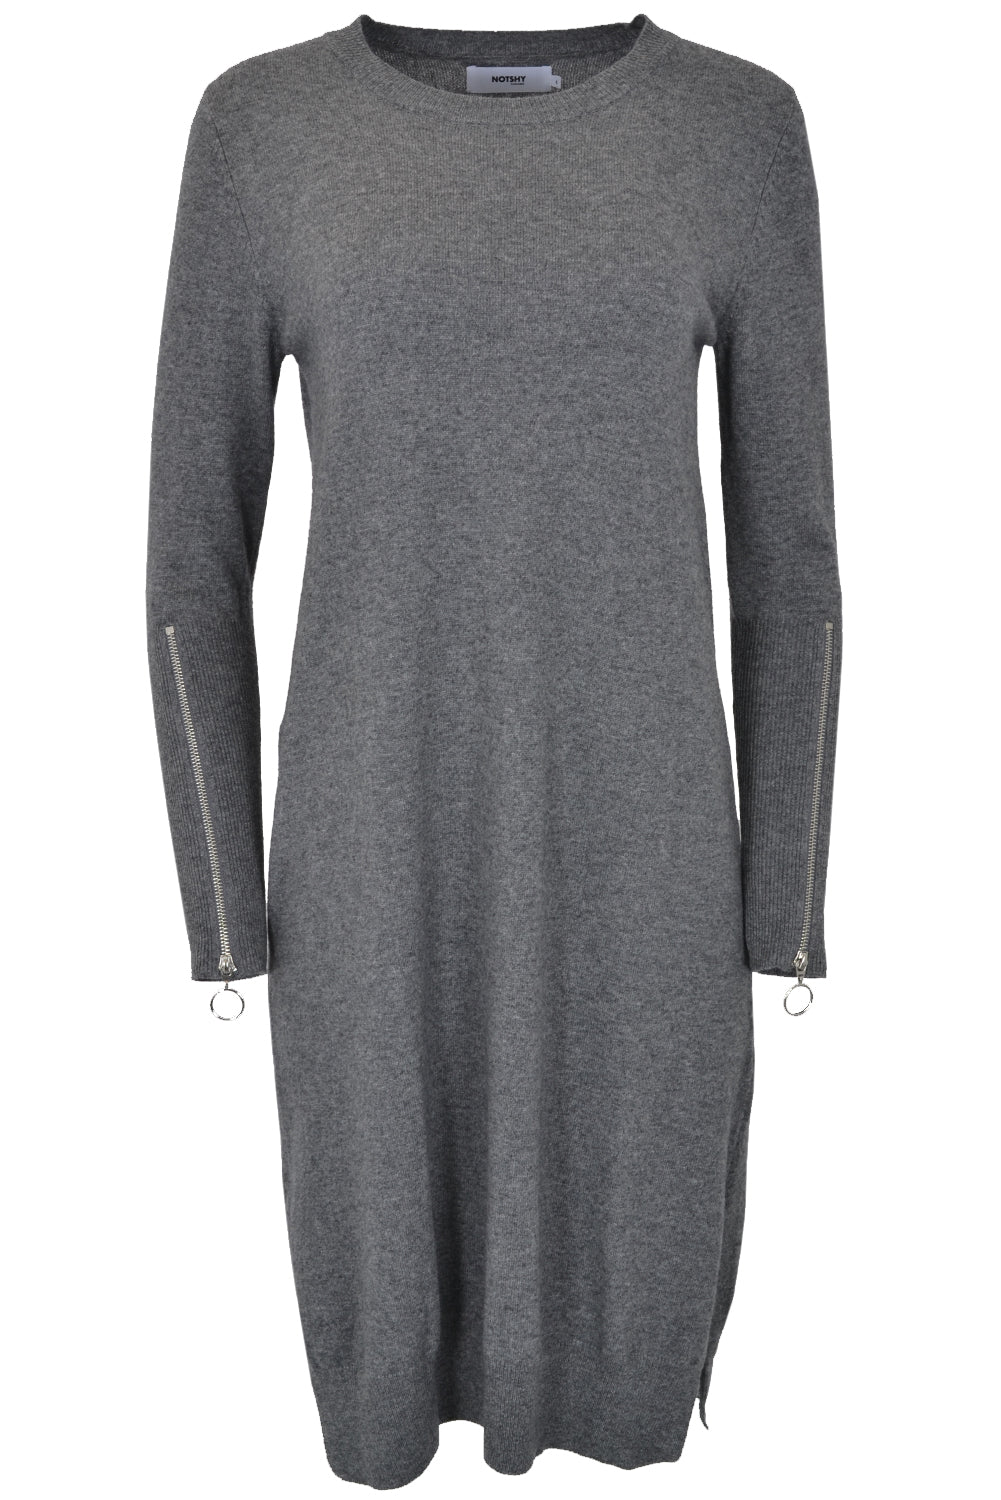 Not Shy Sweater Dress with Zip Sleeves Anthracite SERAPHINE - Sub Couture